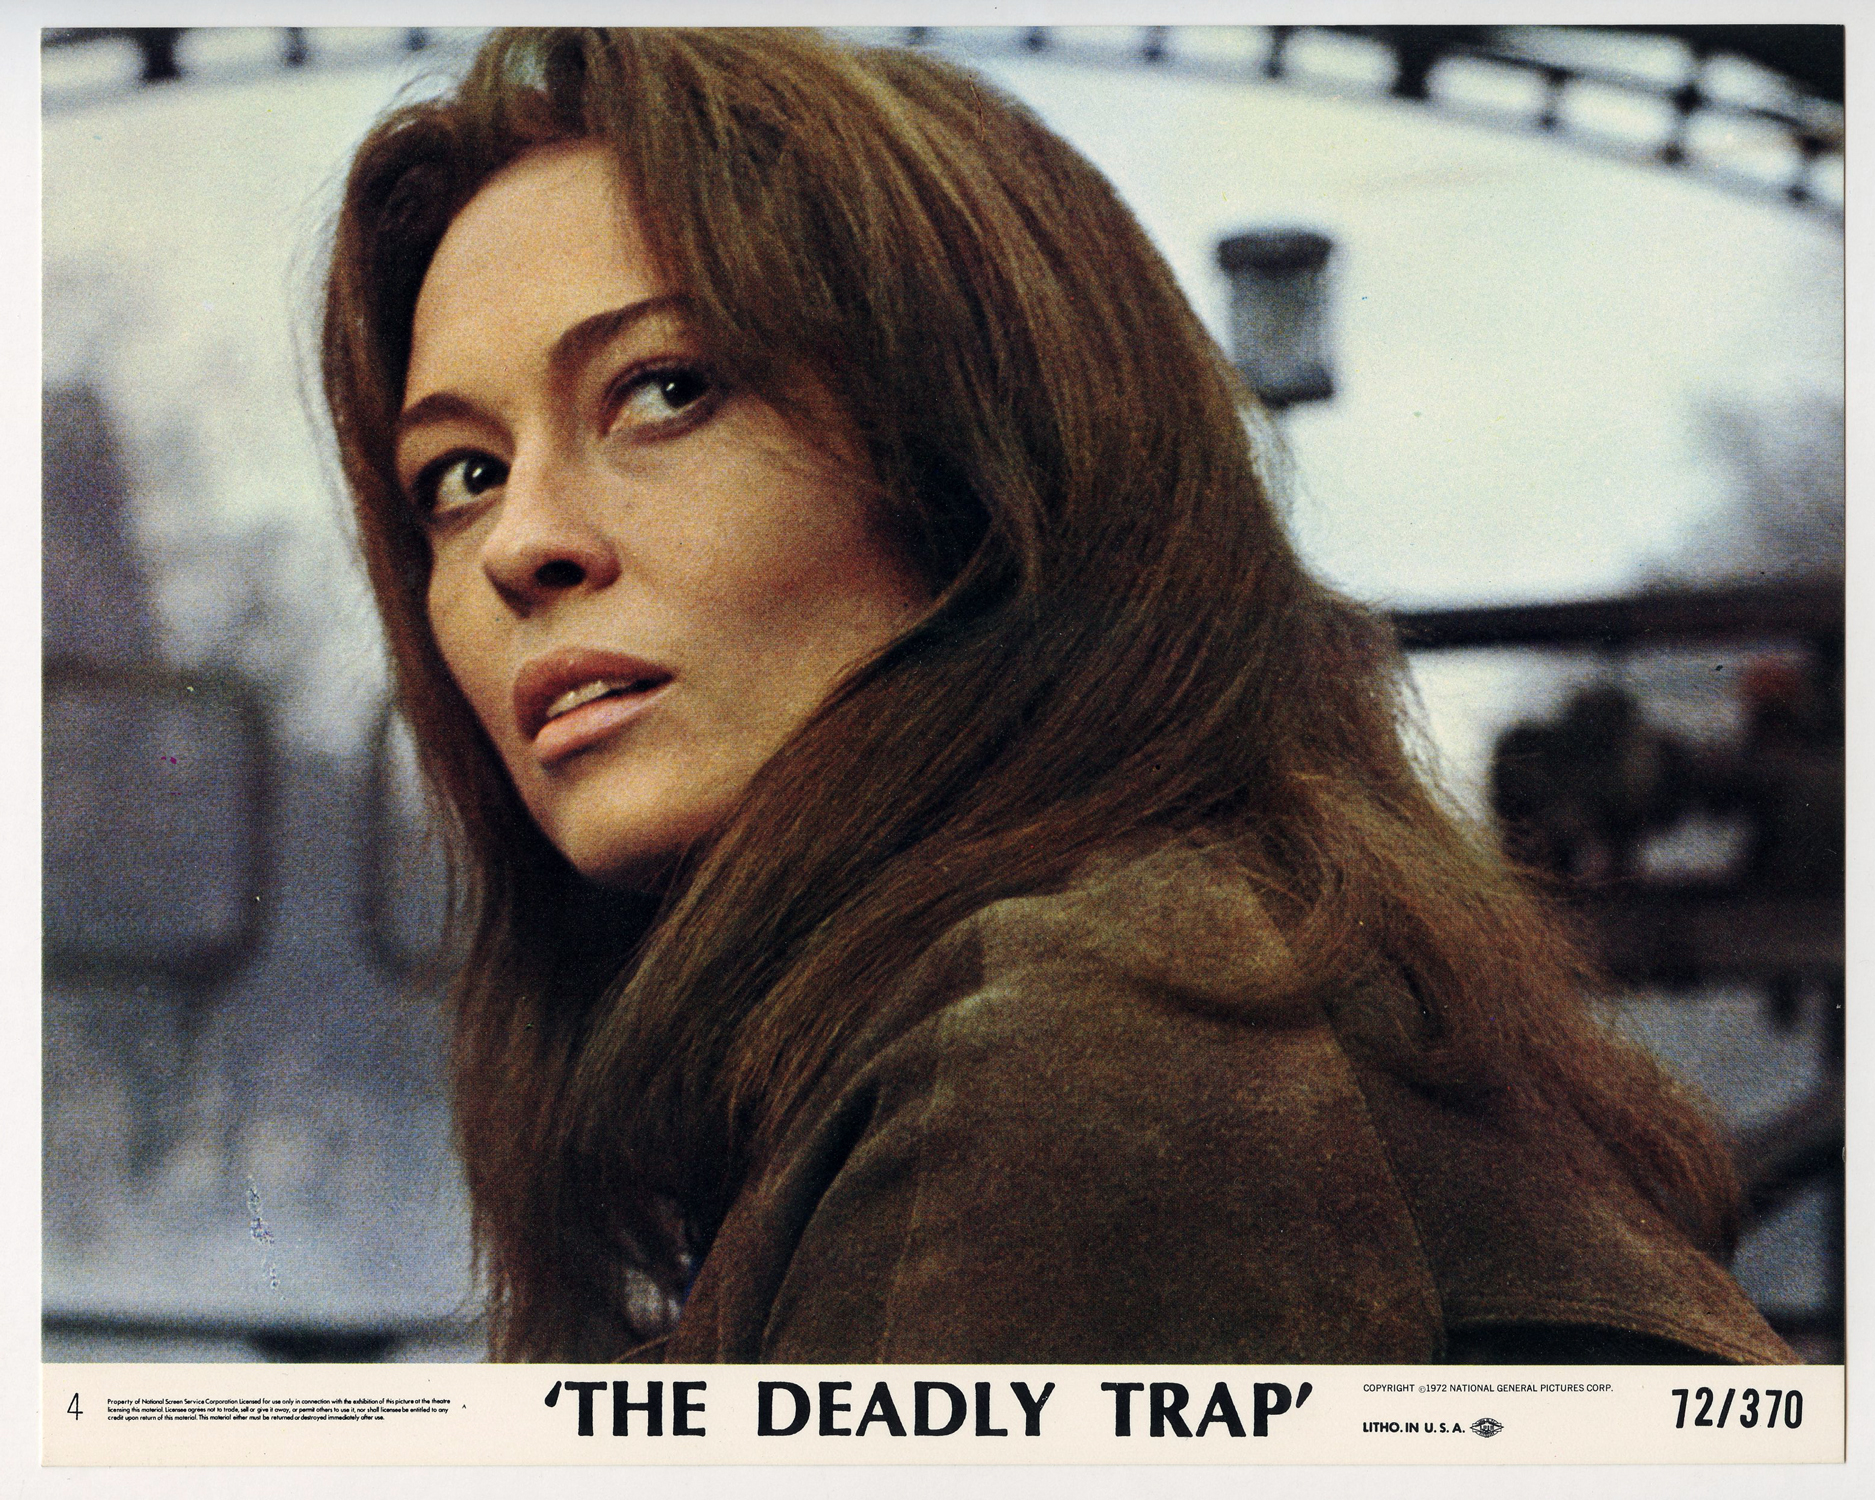 Faye Dunaway Photo 1971 The Deadly Trap Original Vintage